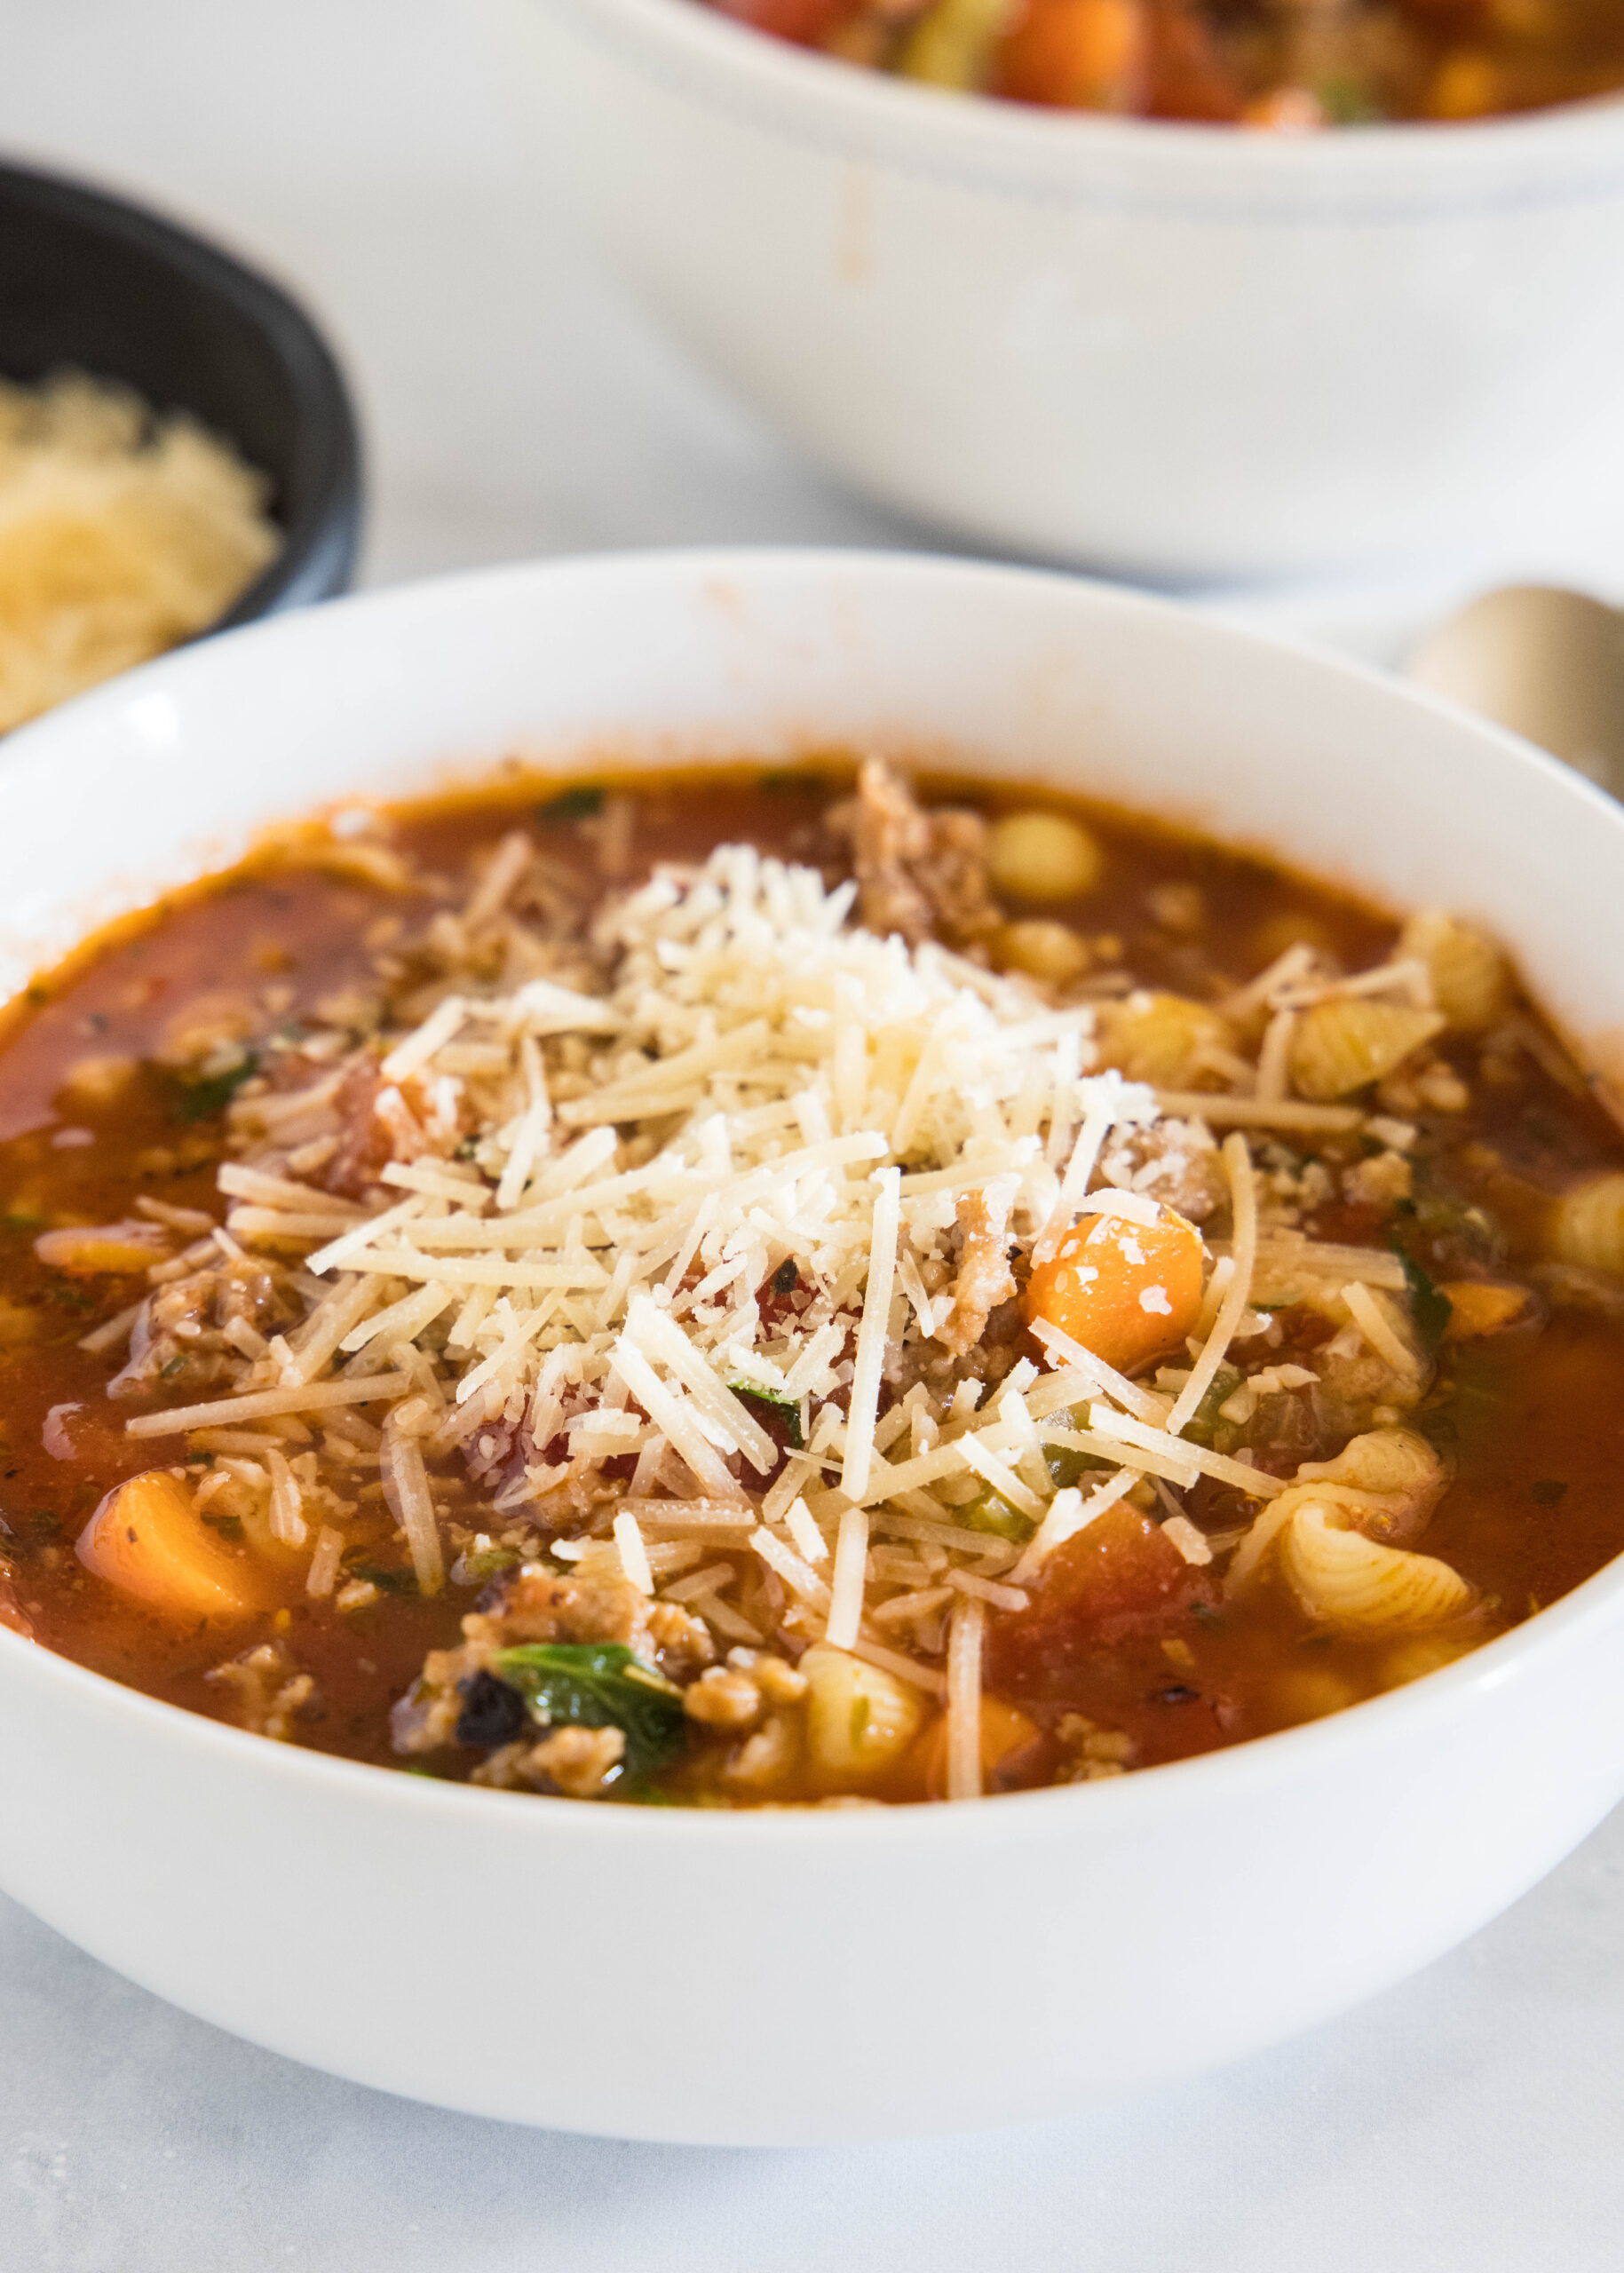 A bowl of Italian sausage soup topped with shredded cheese.